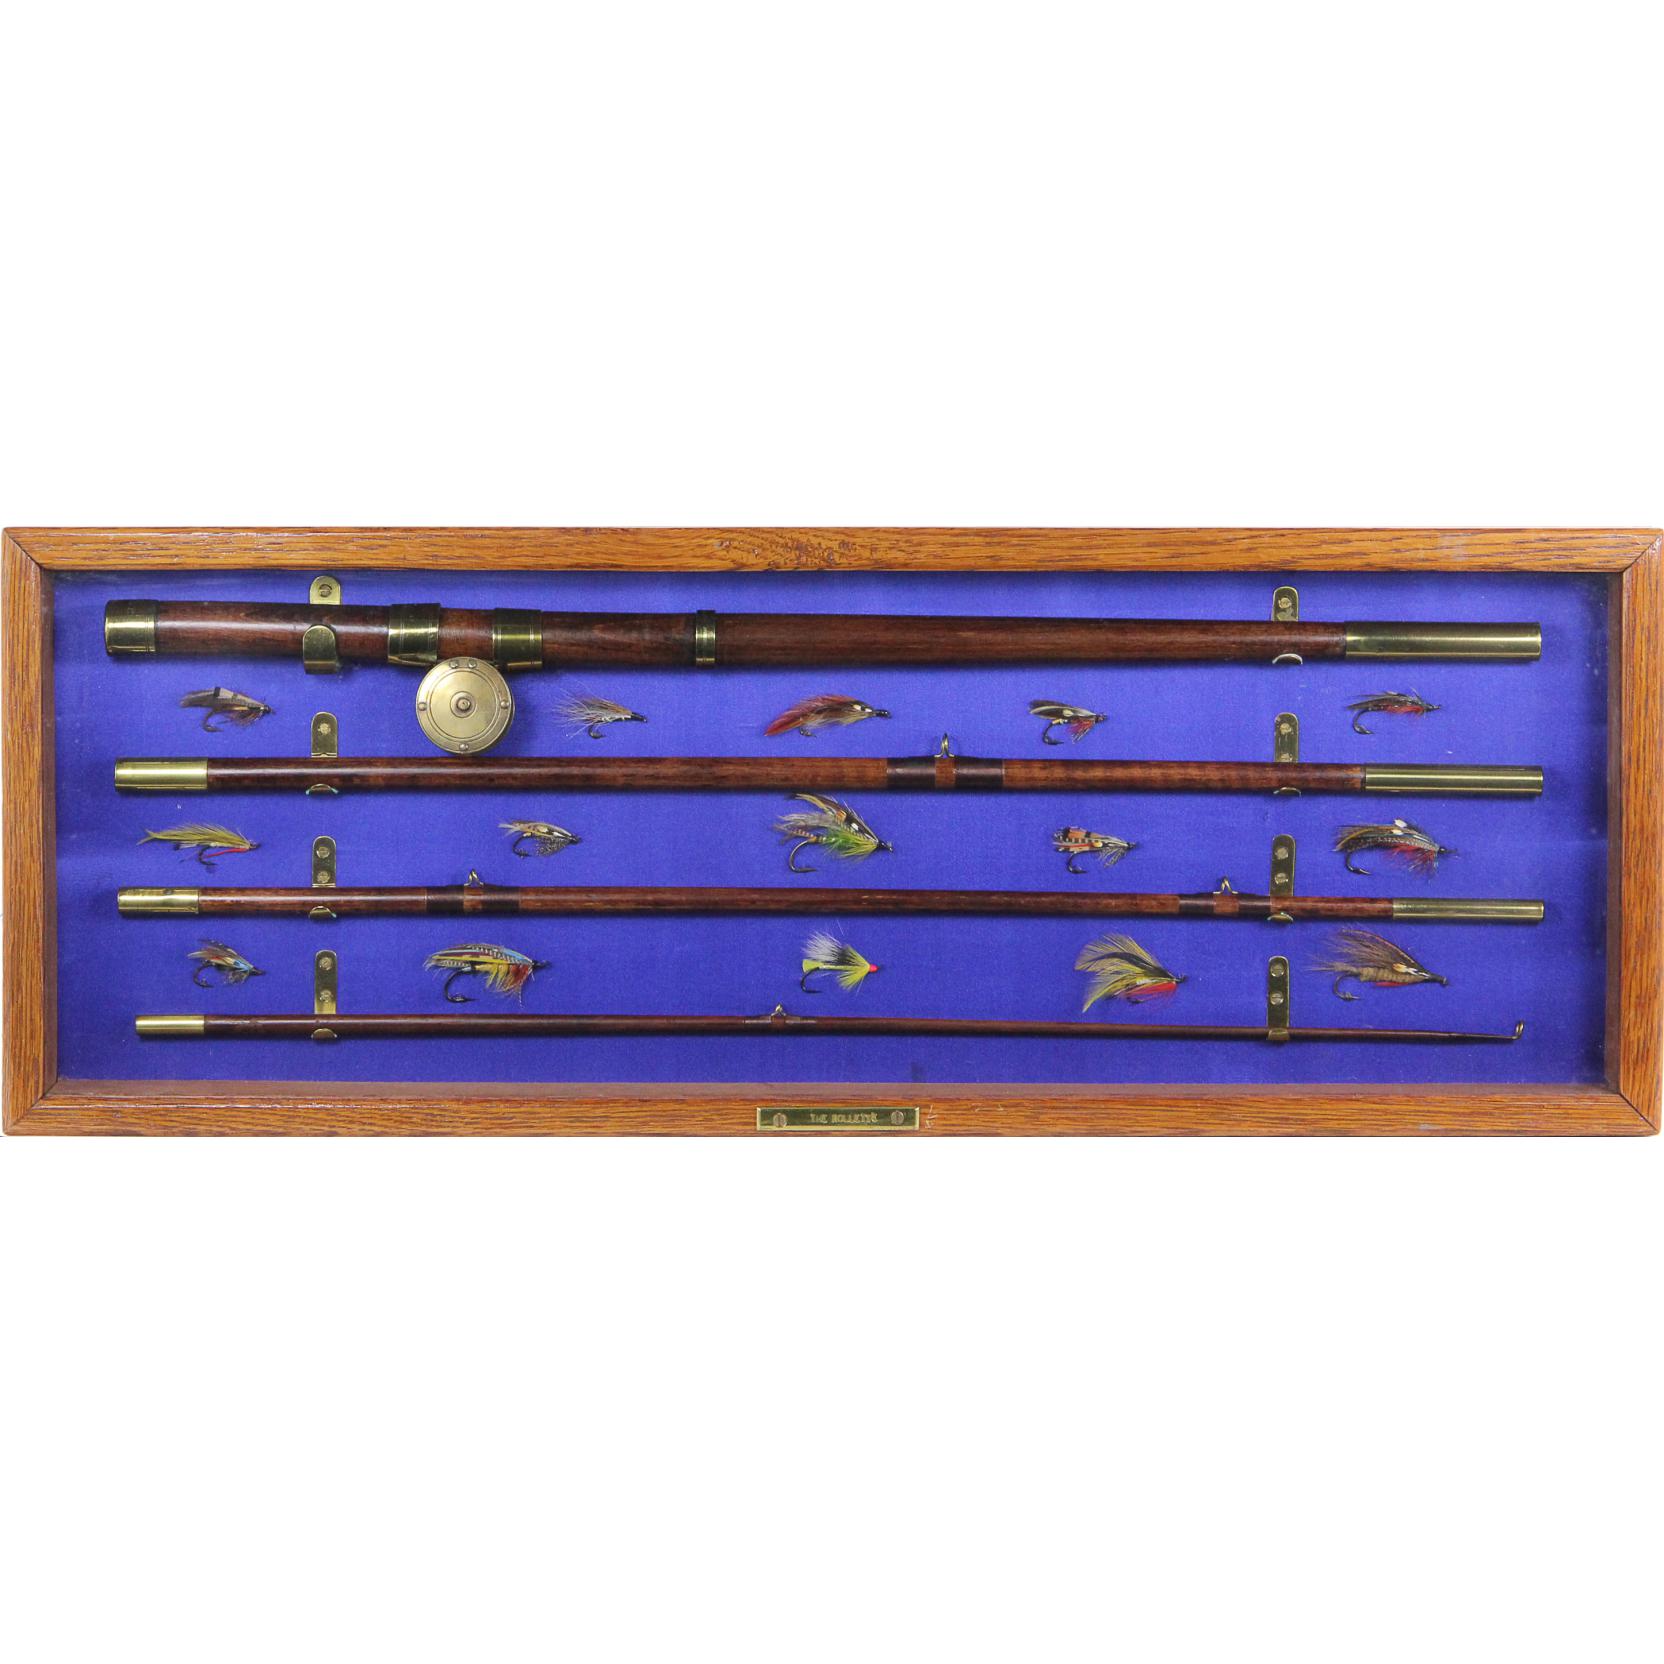 Antique Fly Fishing Rod and Reel Display (Lot 231 - The Winter